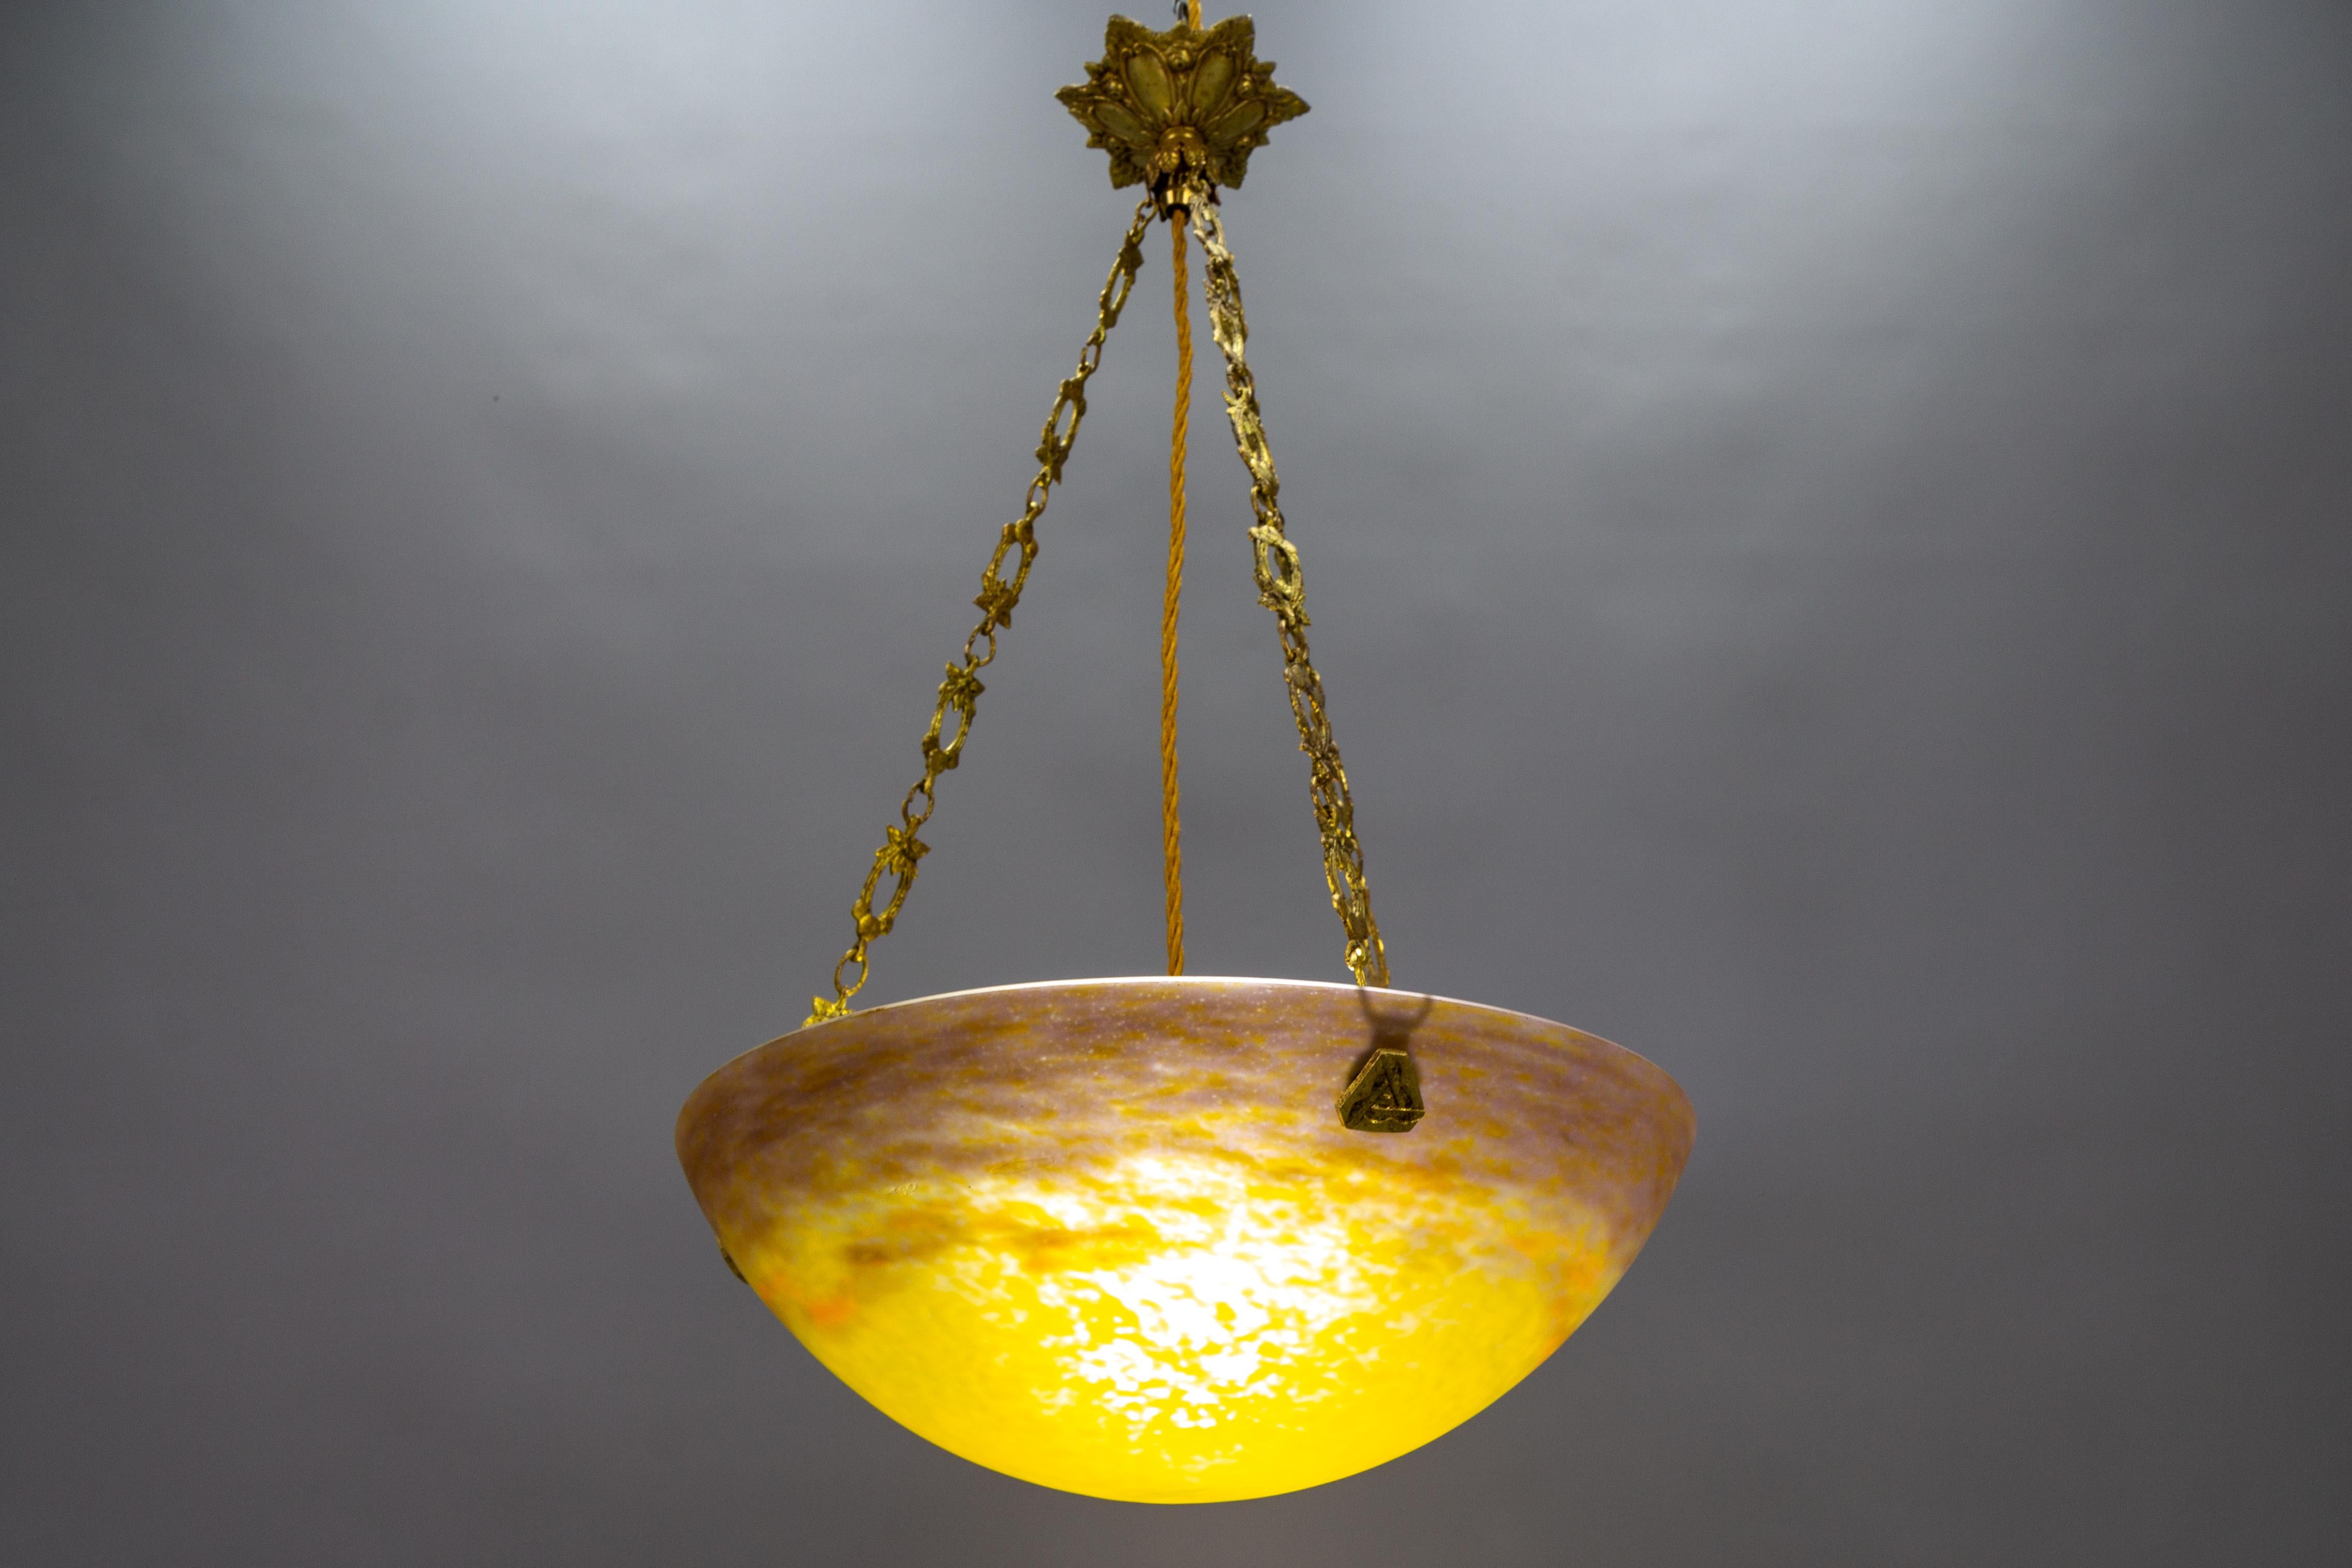 French Art Deco Yellow Pendant Light by G.V. de Croismare, Muller Frères, 1920s For Sale 2